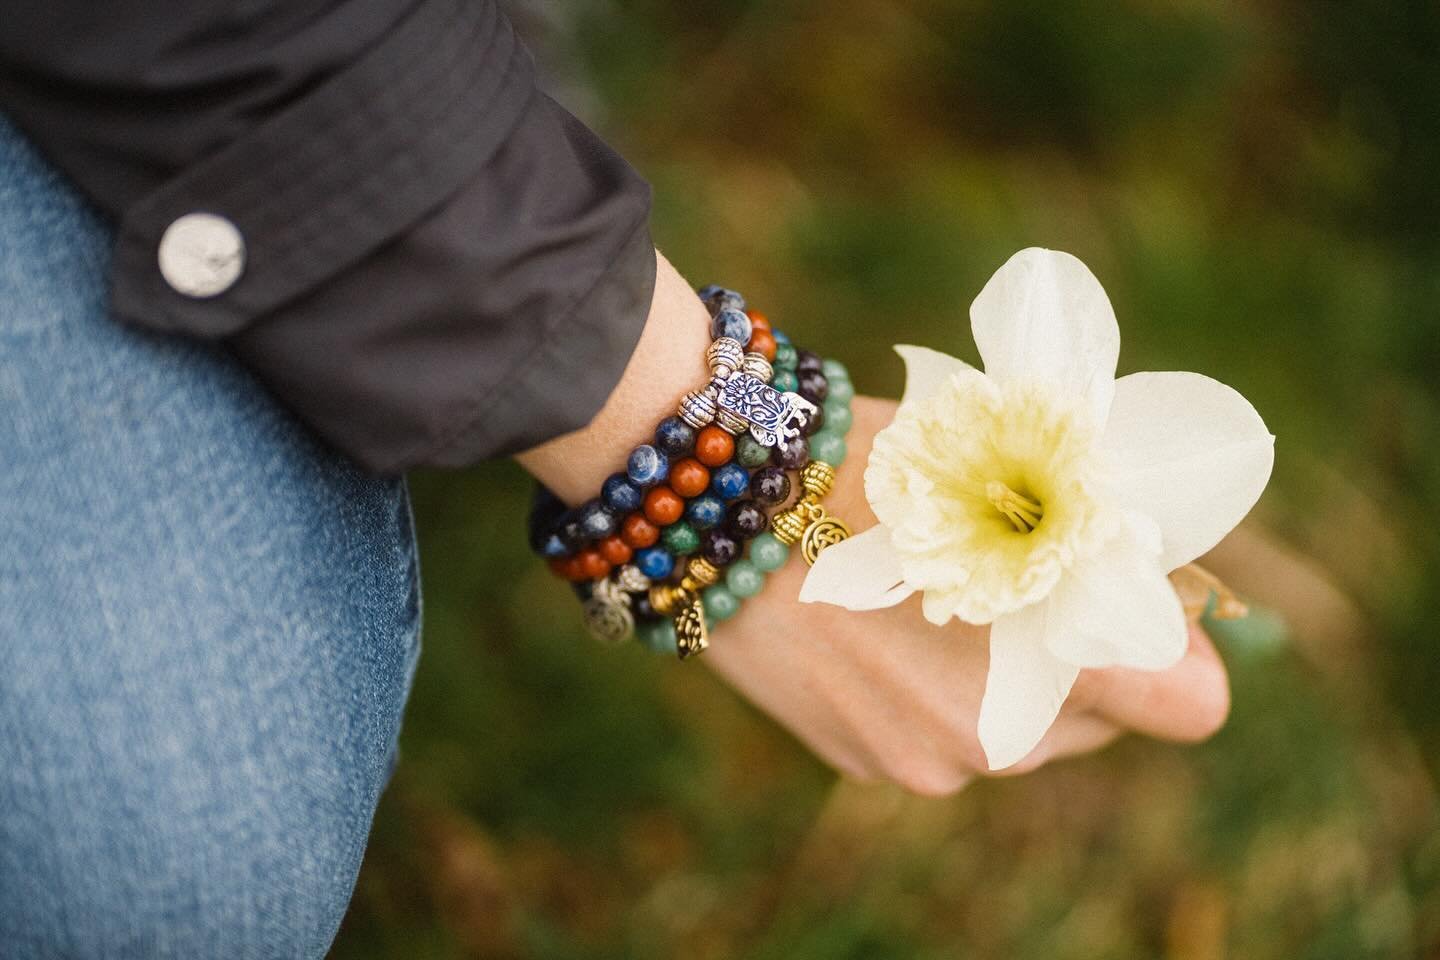 Blooming now! Curate the perfect spring stack of our hand crafted bracelets! 🌷
&bull;
&bull;
&bull;
&bull;
&bull;
&bull;
&bull;
&bull;
&bull;
&bull; #bracelets #charmbracelets #braceletstacks #daffodils #springaccessories #springfashion #jewelryaddi